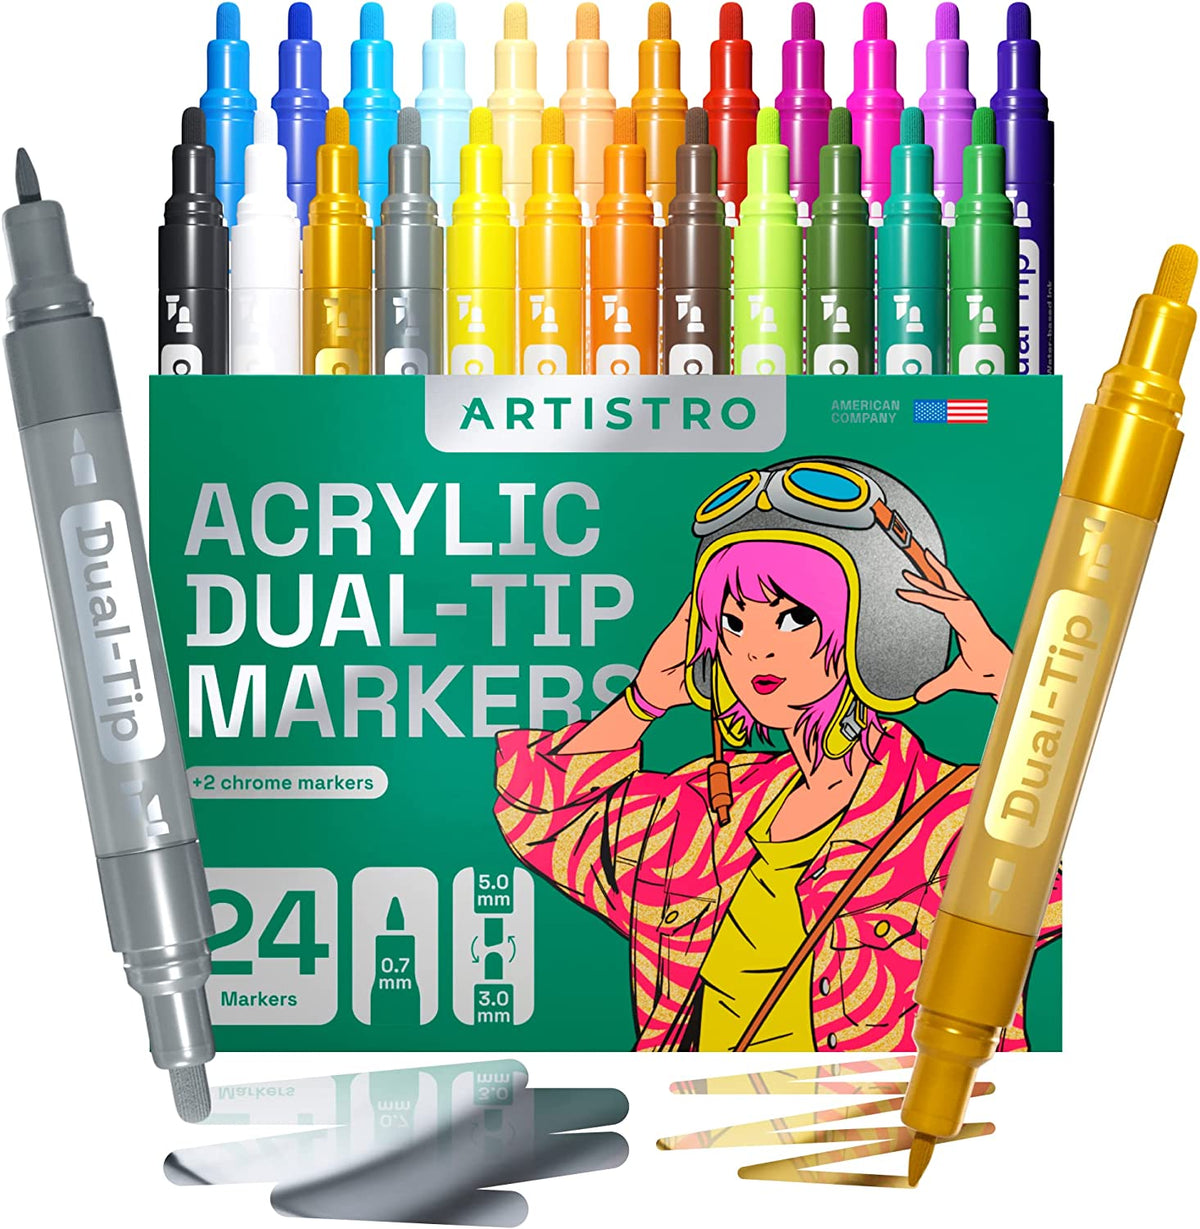  ARTISTRO Watercolor Paint Set, 48 Vivid Colors in Portable Box,  Including Metallic and Fluorescent Colors for Artists, Amateur Hobbyists  and Painting Lovers, Perfect For Travel : ARTISTRO: Toys & Games